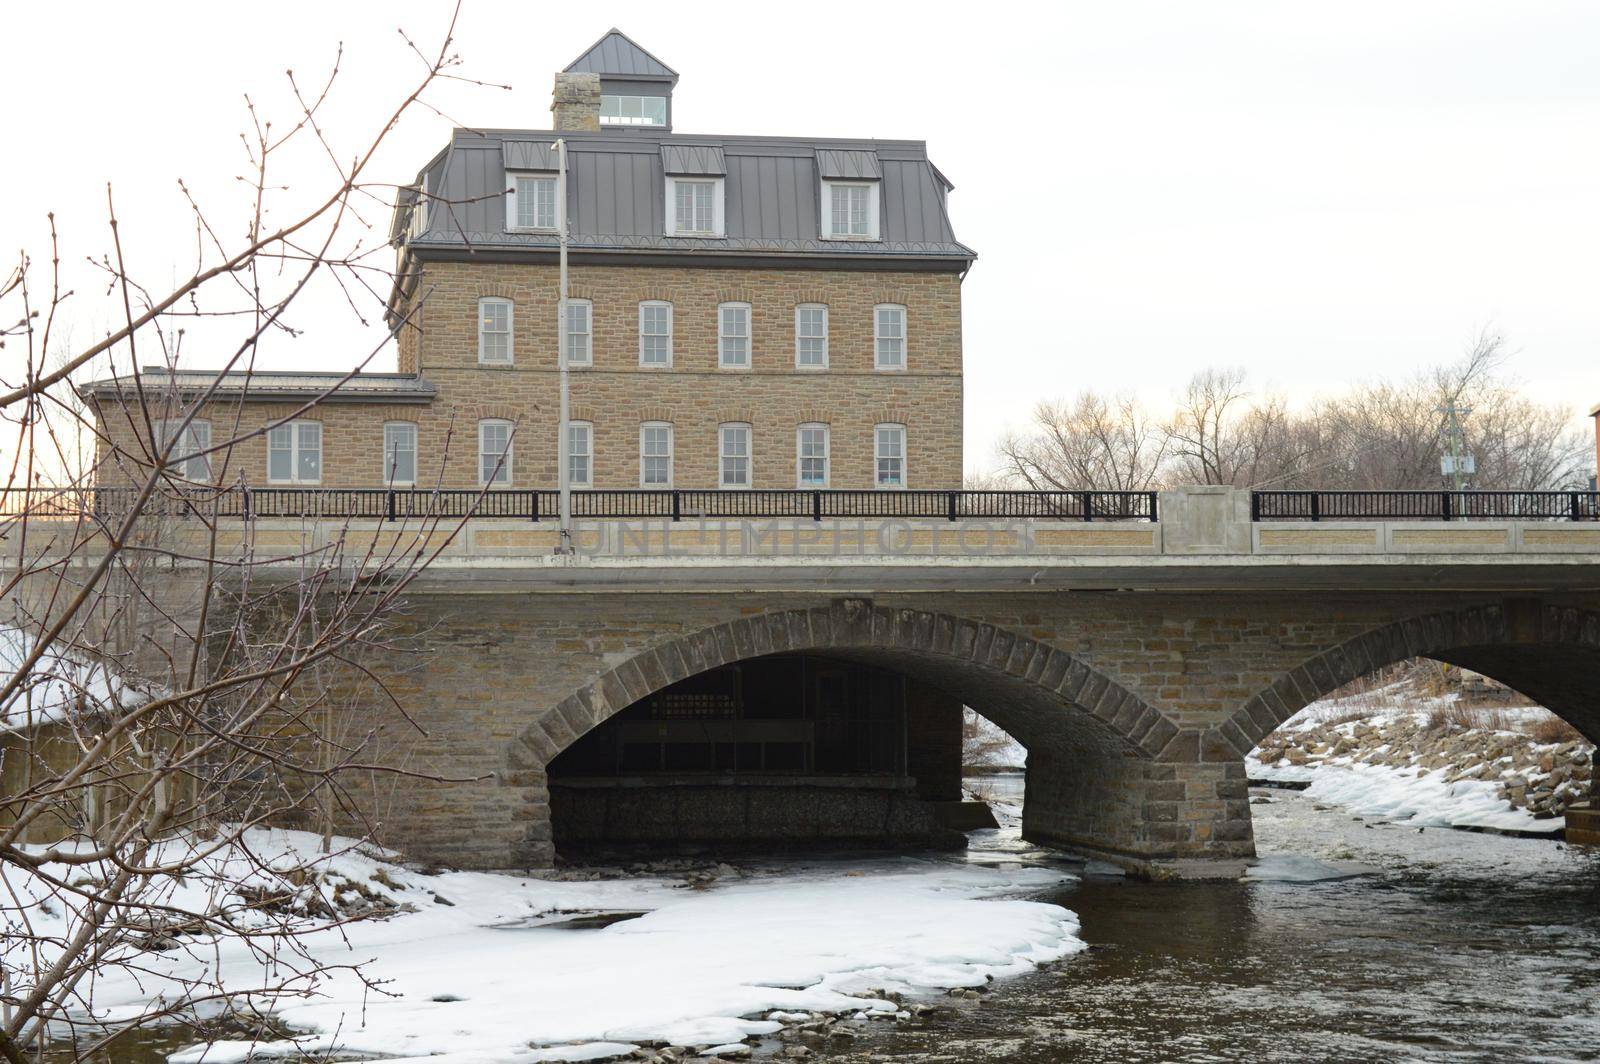 SMITHS FALLS, ONTARIO, CANADA, MARCH 10, 2021: A view of the Rideau Canal Museum and Beckwith St Bridge from across the waterway on a late winters day in small town Smiths Falls, ON.